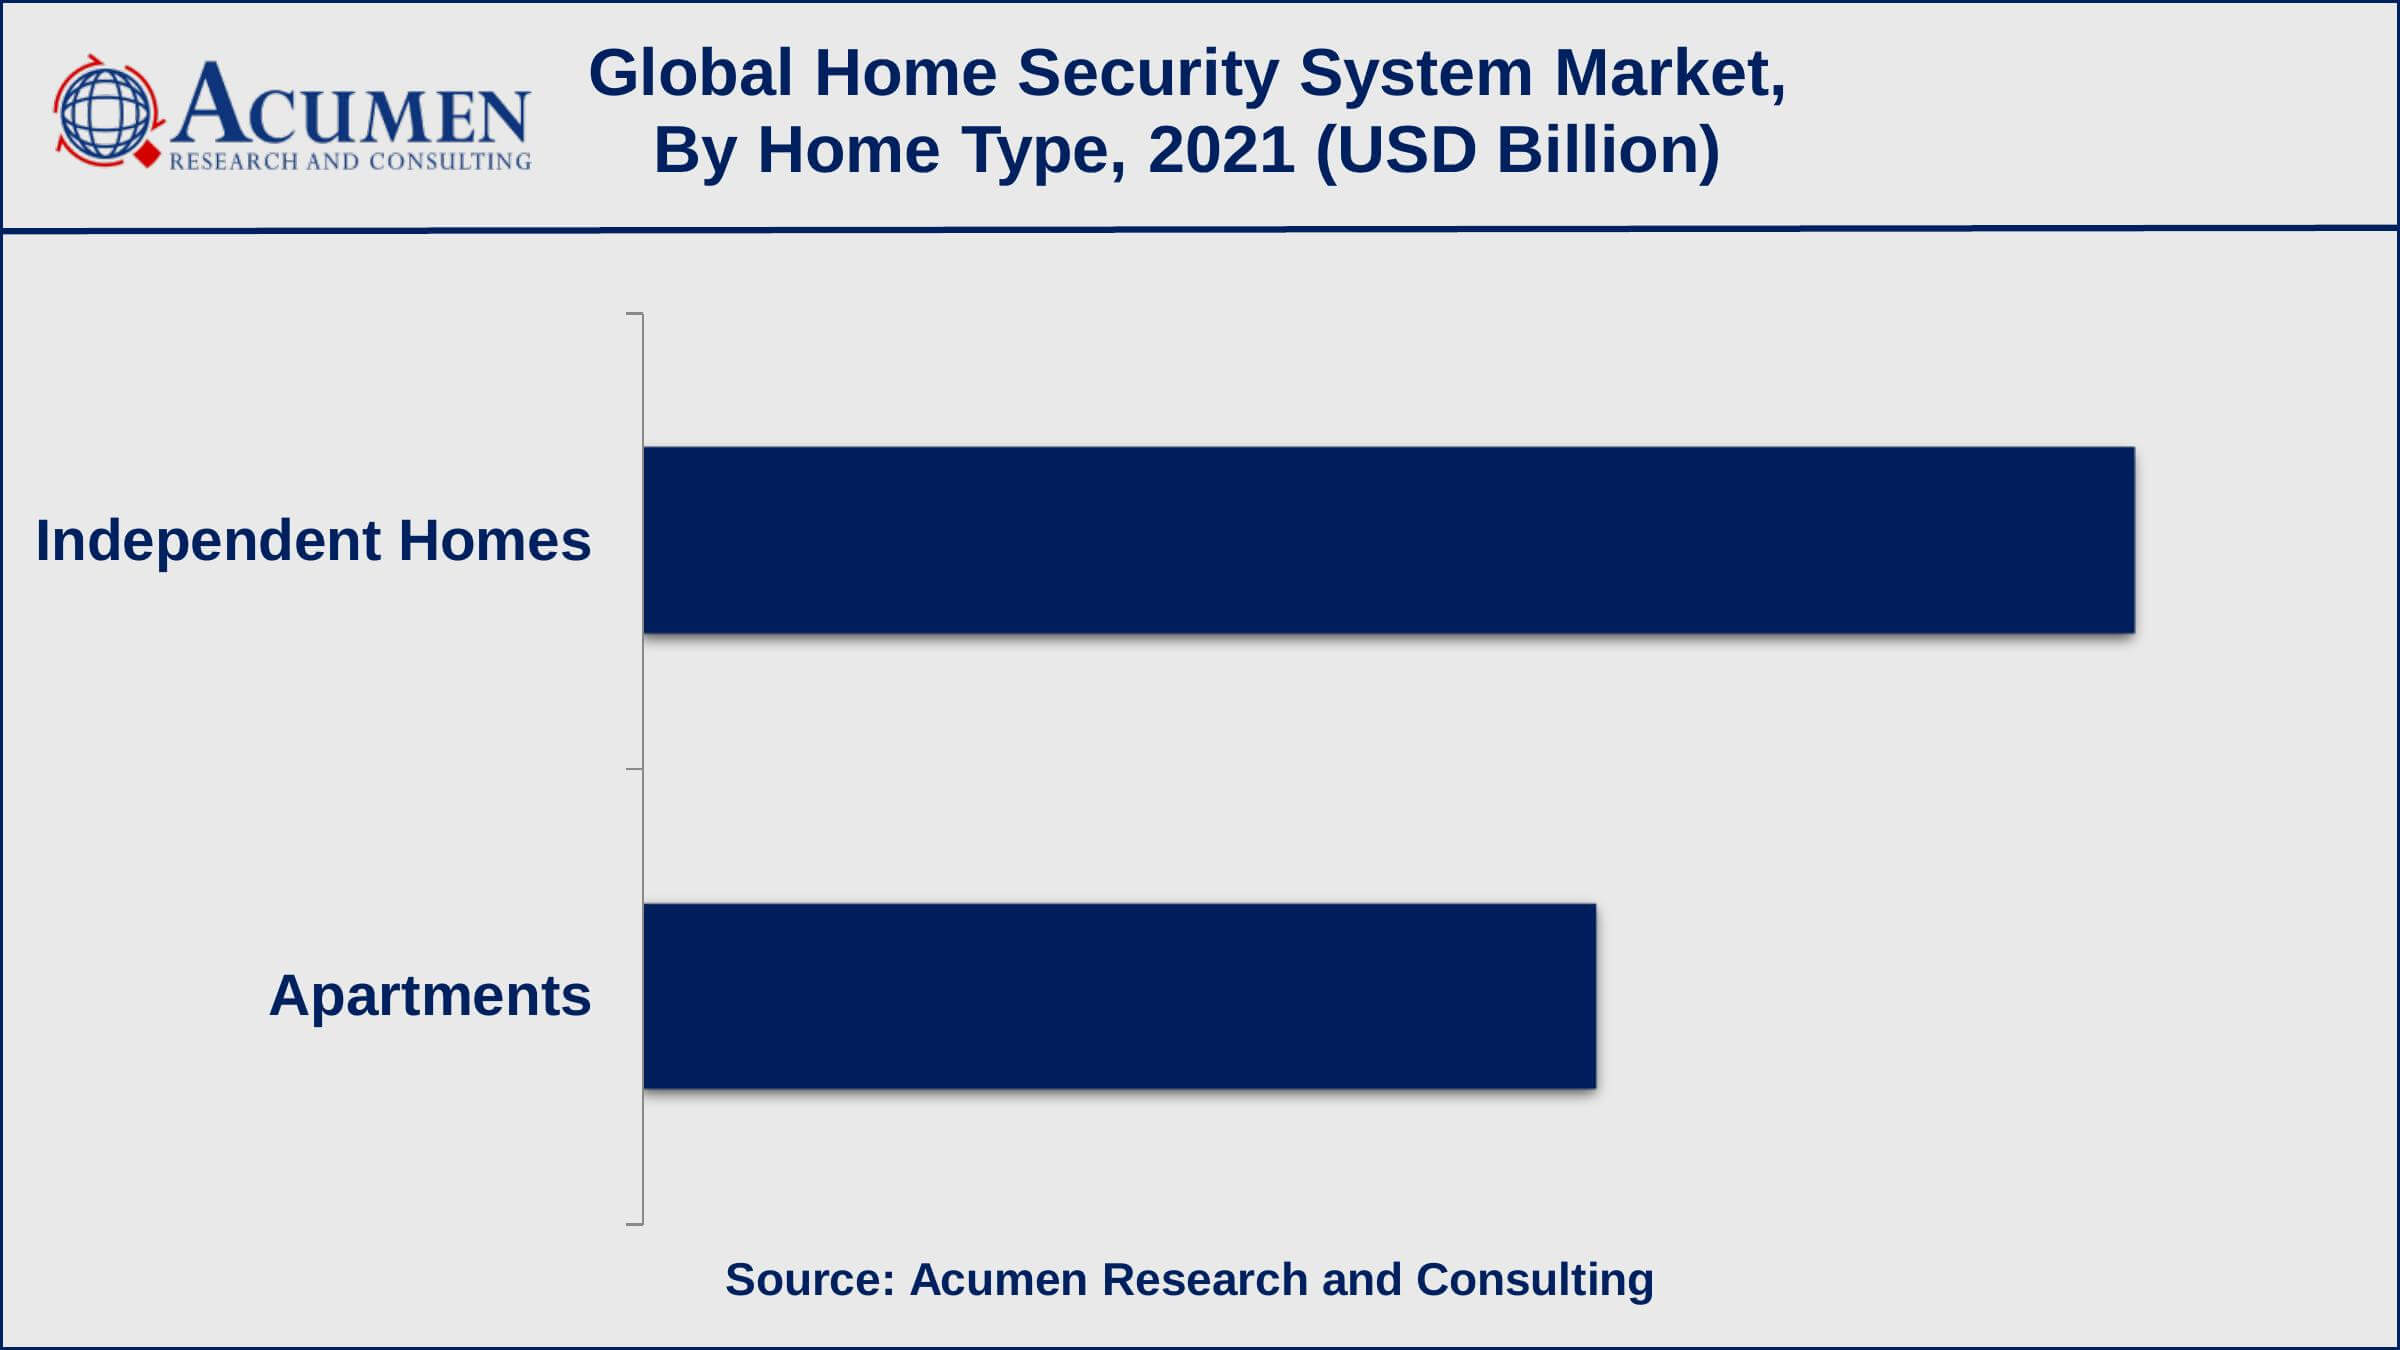 The growing adoption of IoT in security is a popular home security system market trend that drives the industry demand